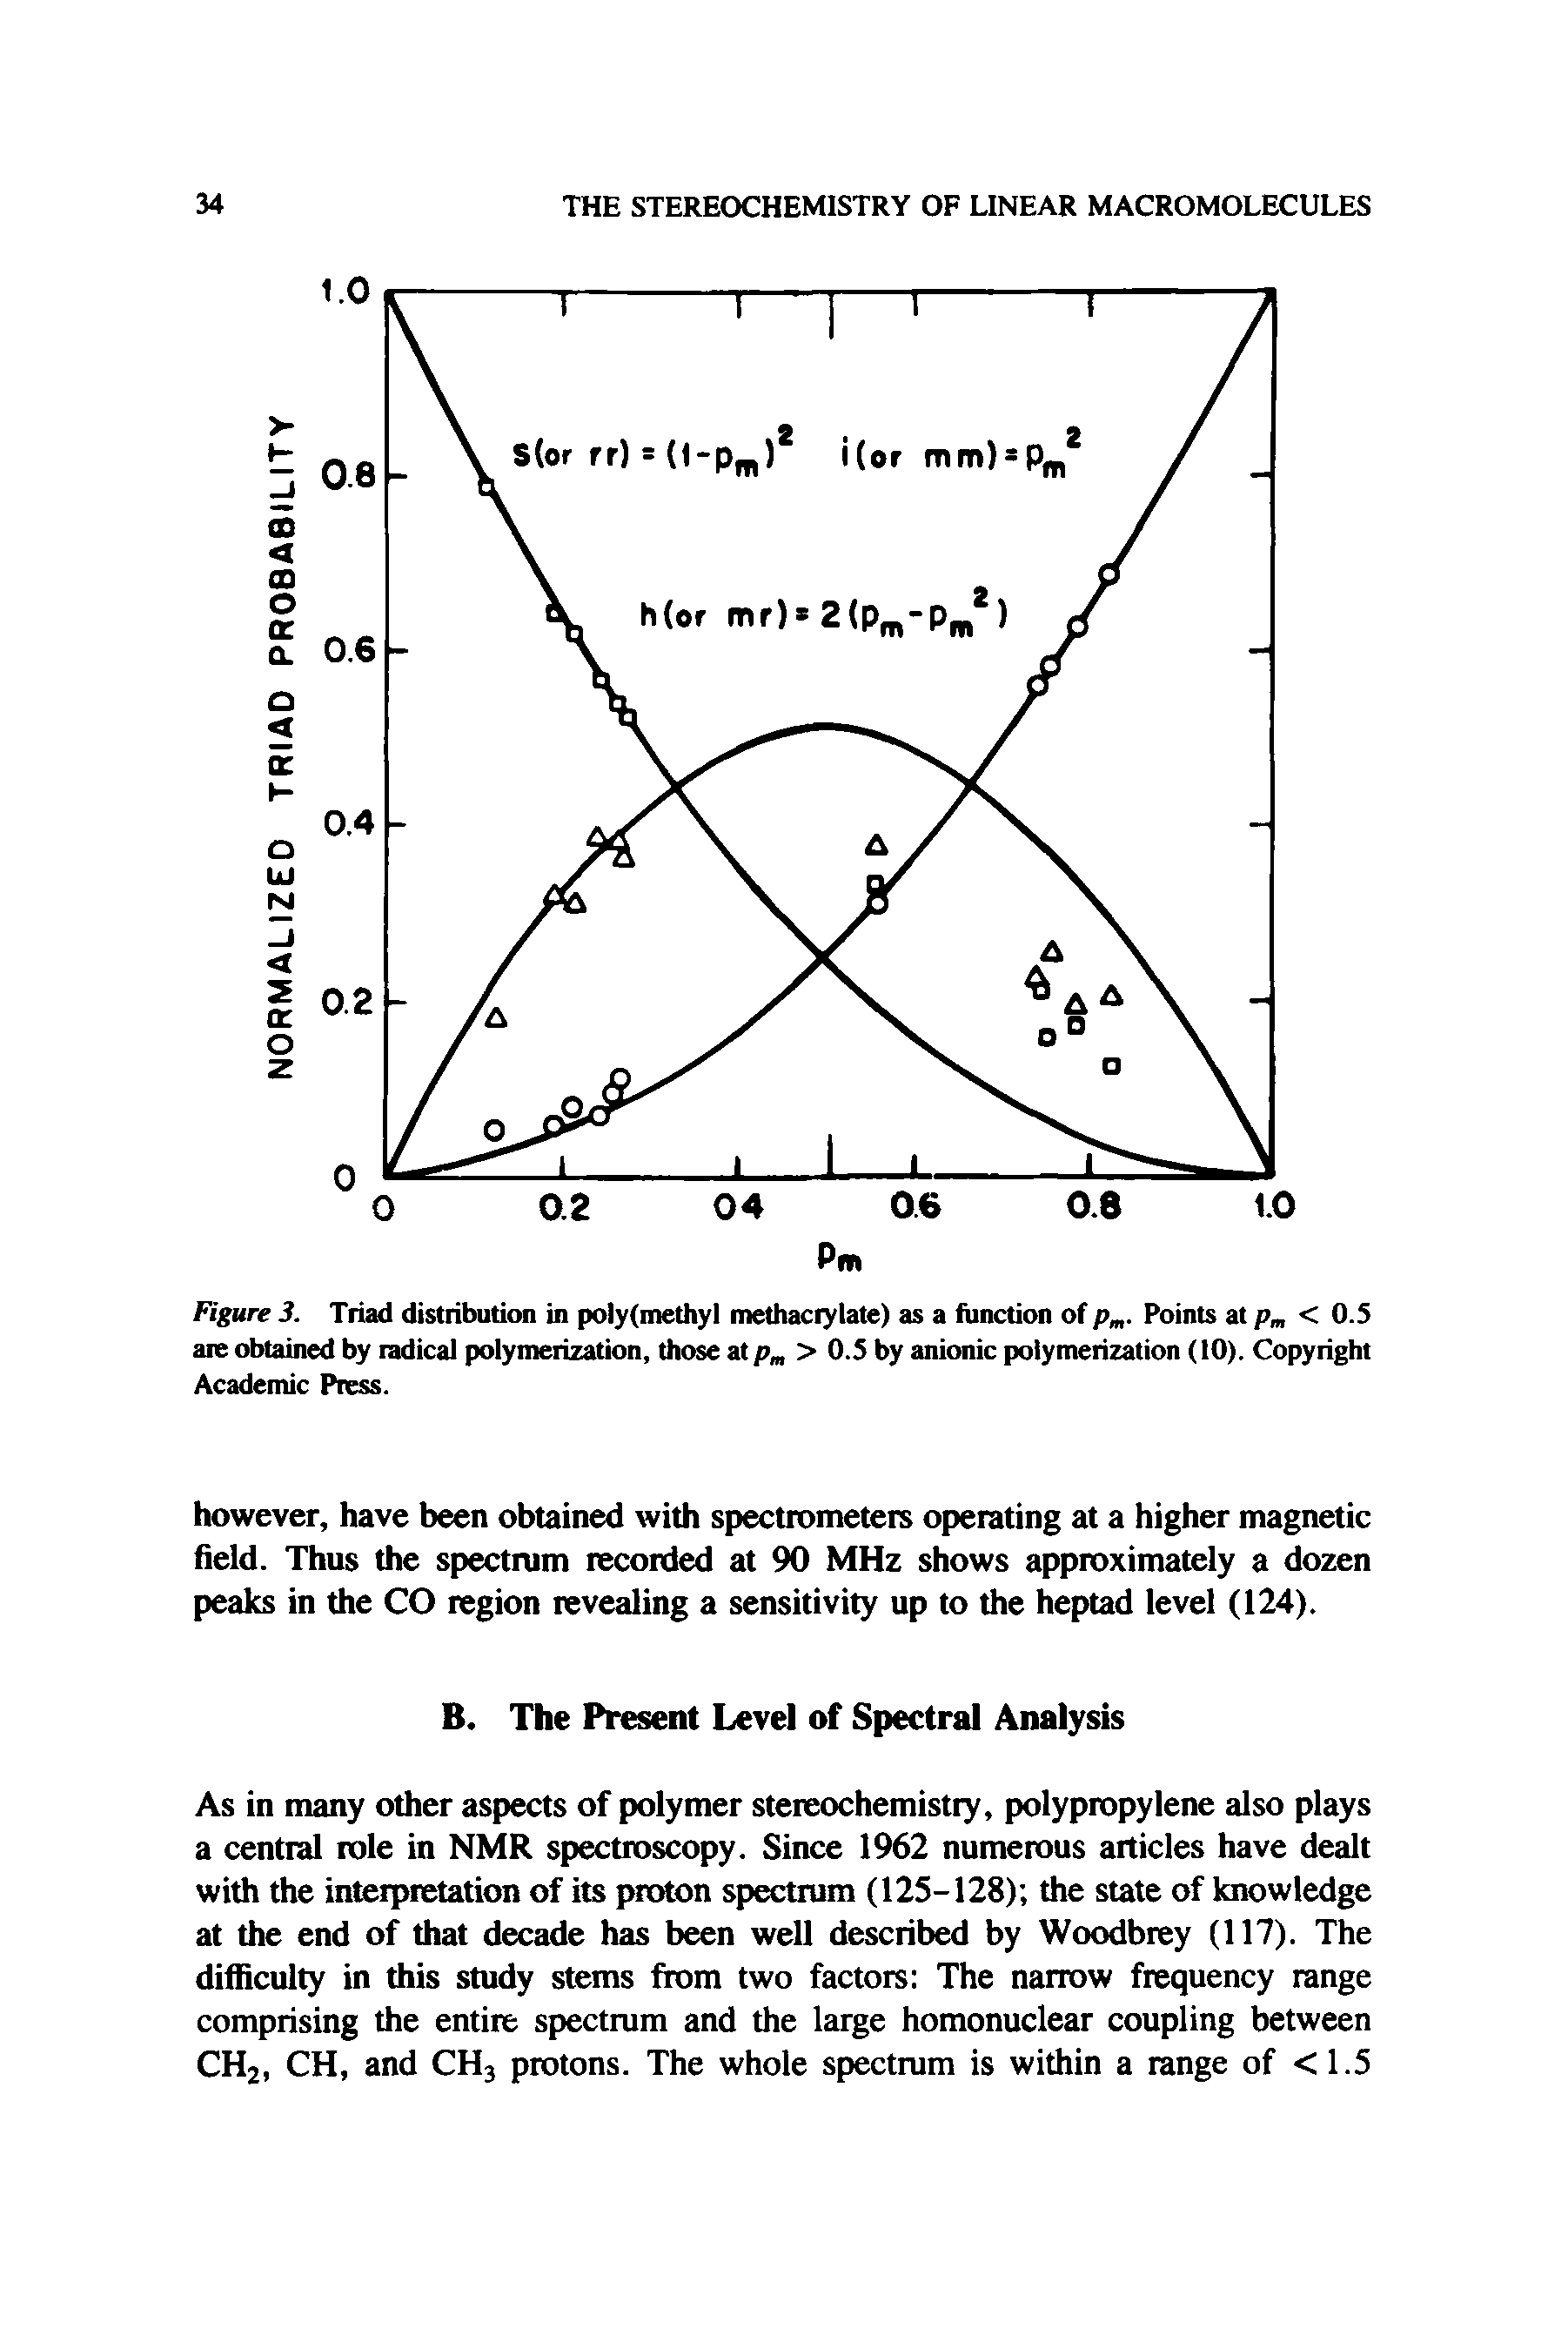 Figure 3. Triad distribution in poly(iiiethyl methaciylate) as a function of p . Points at < O.S are obtained by radical polymerization, those at p > O.S by anionic polymerization (10). Copyright Academic Press.